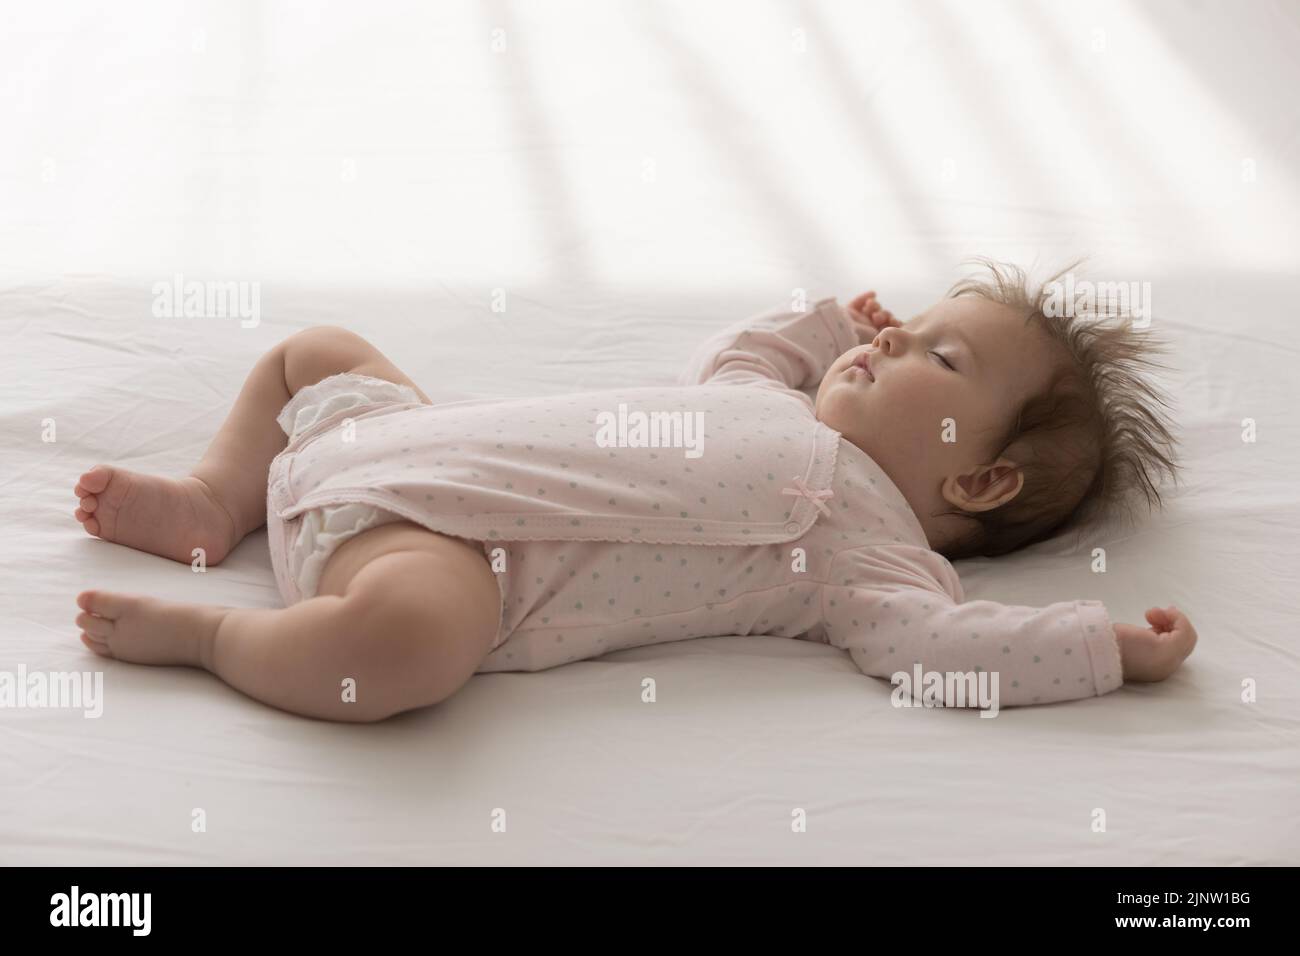 Close up shot peaceful baby sleeping lying in bed Stock Photo